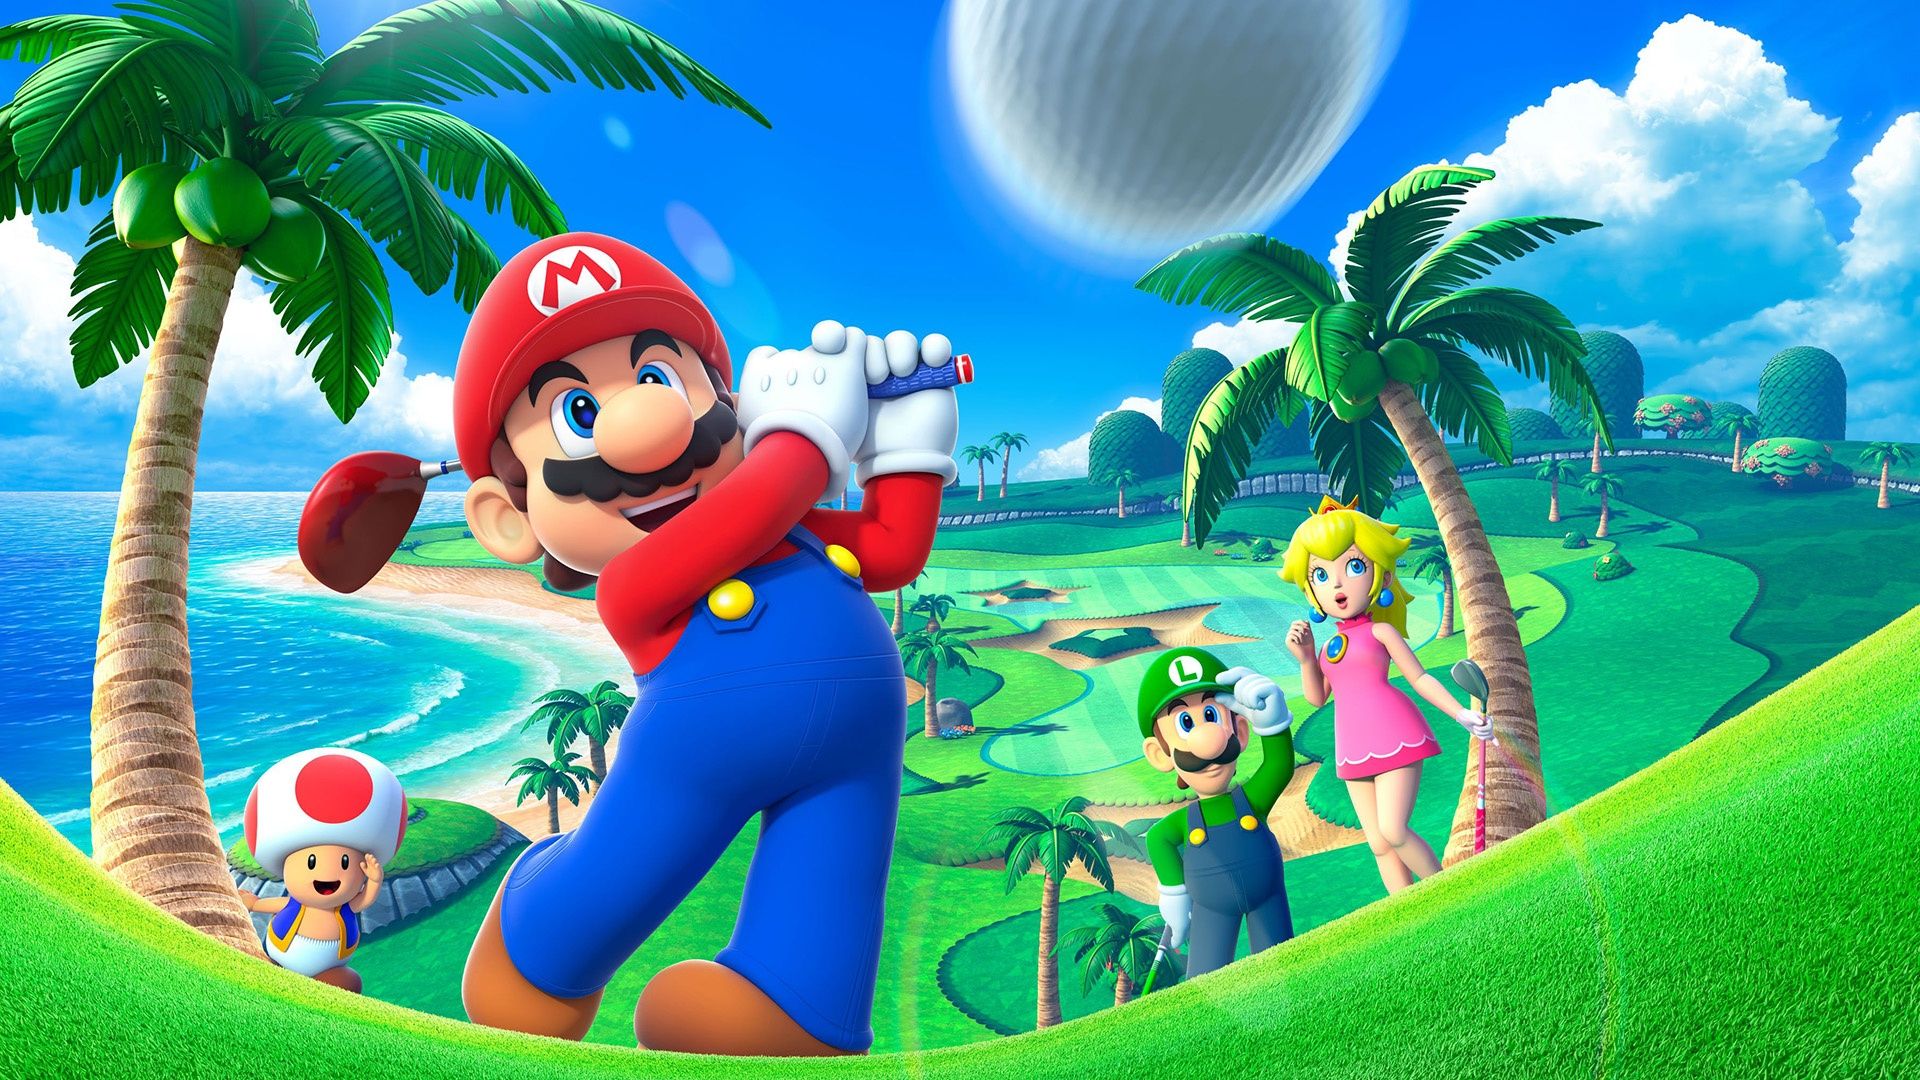 Mario Golf celebrates a comeback on the switch with Super Rush